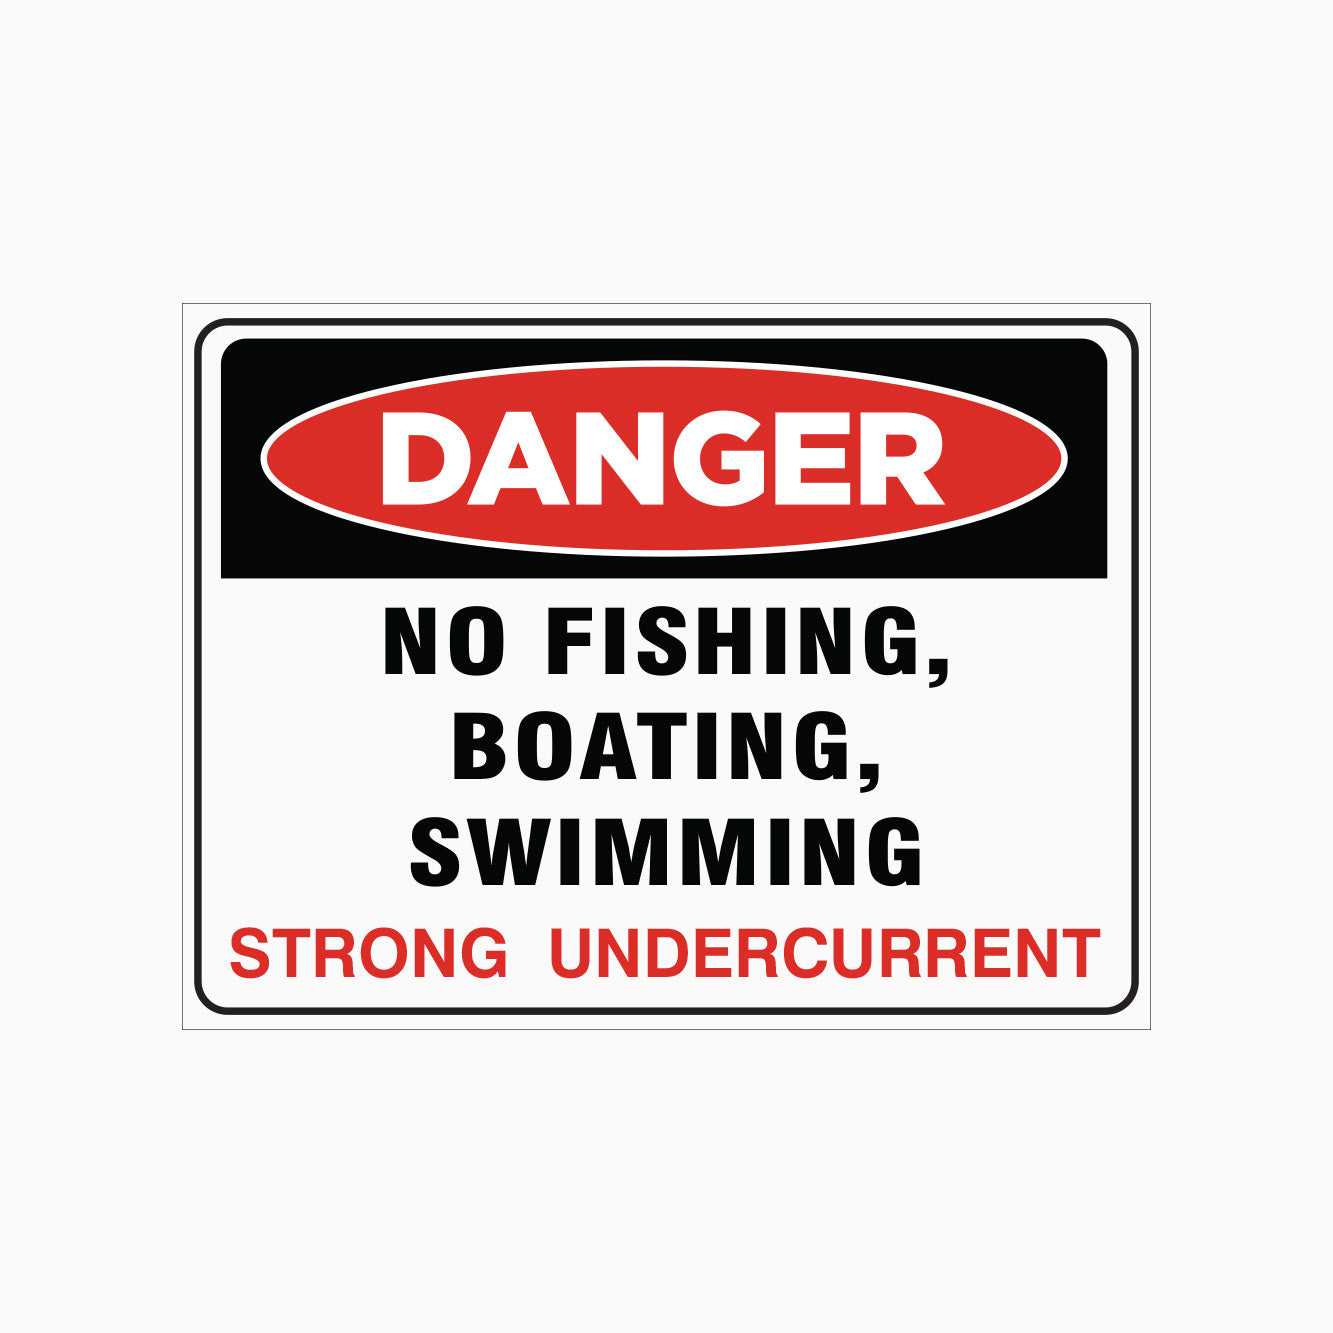 NO FISHING, BOATING AND SWIMMING SIGN - STRONG UNDERCURRENT SIGN